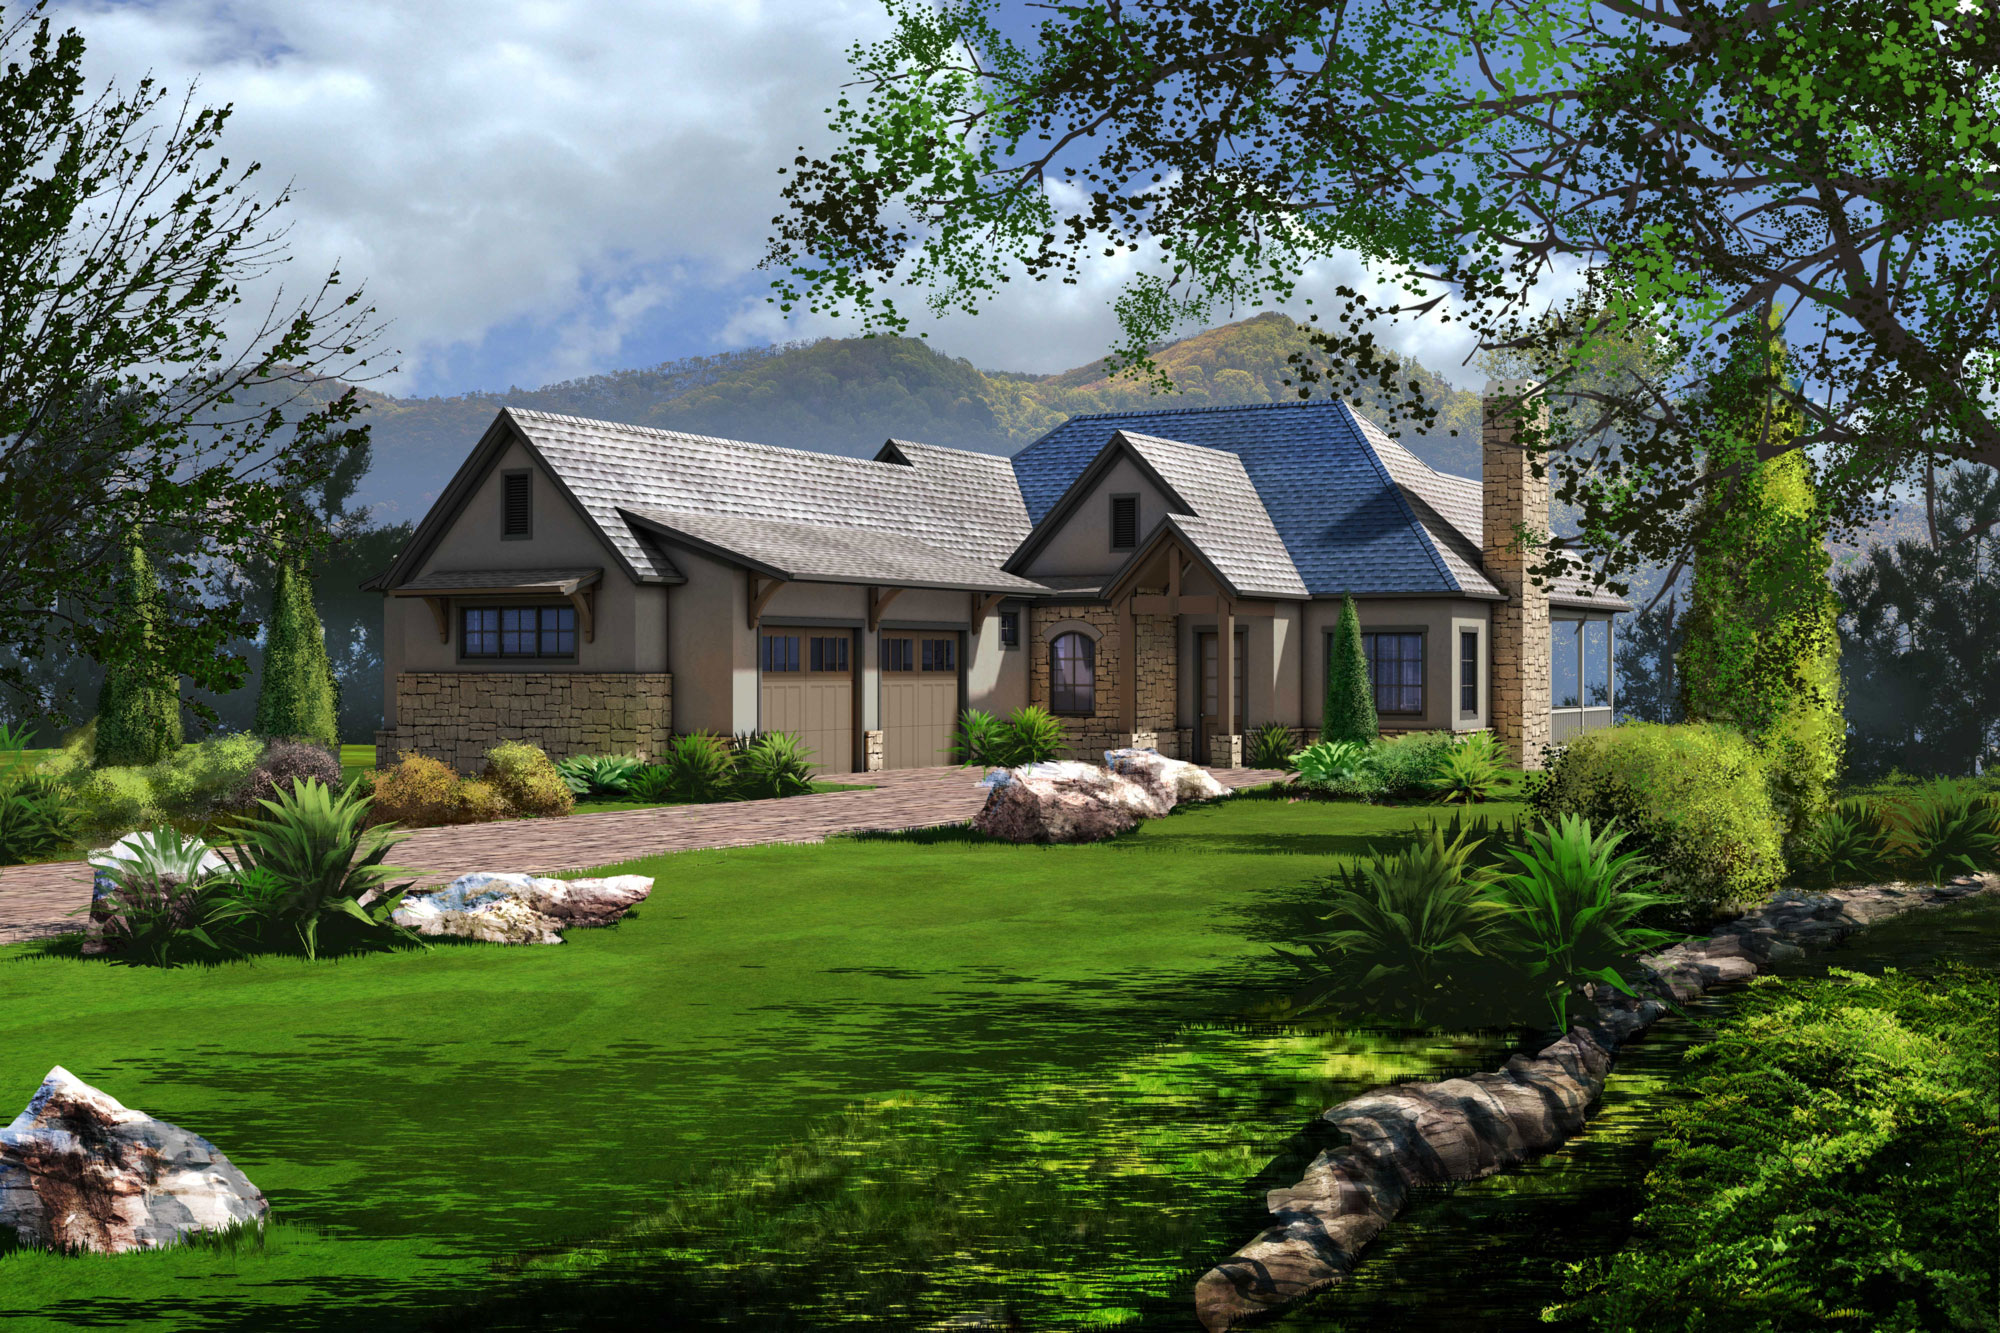 The Morning Glory rendering Meadowview at The Cliffs at Walnut Cove